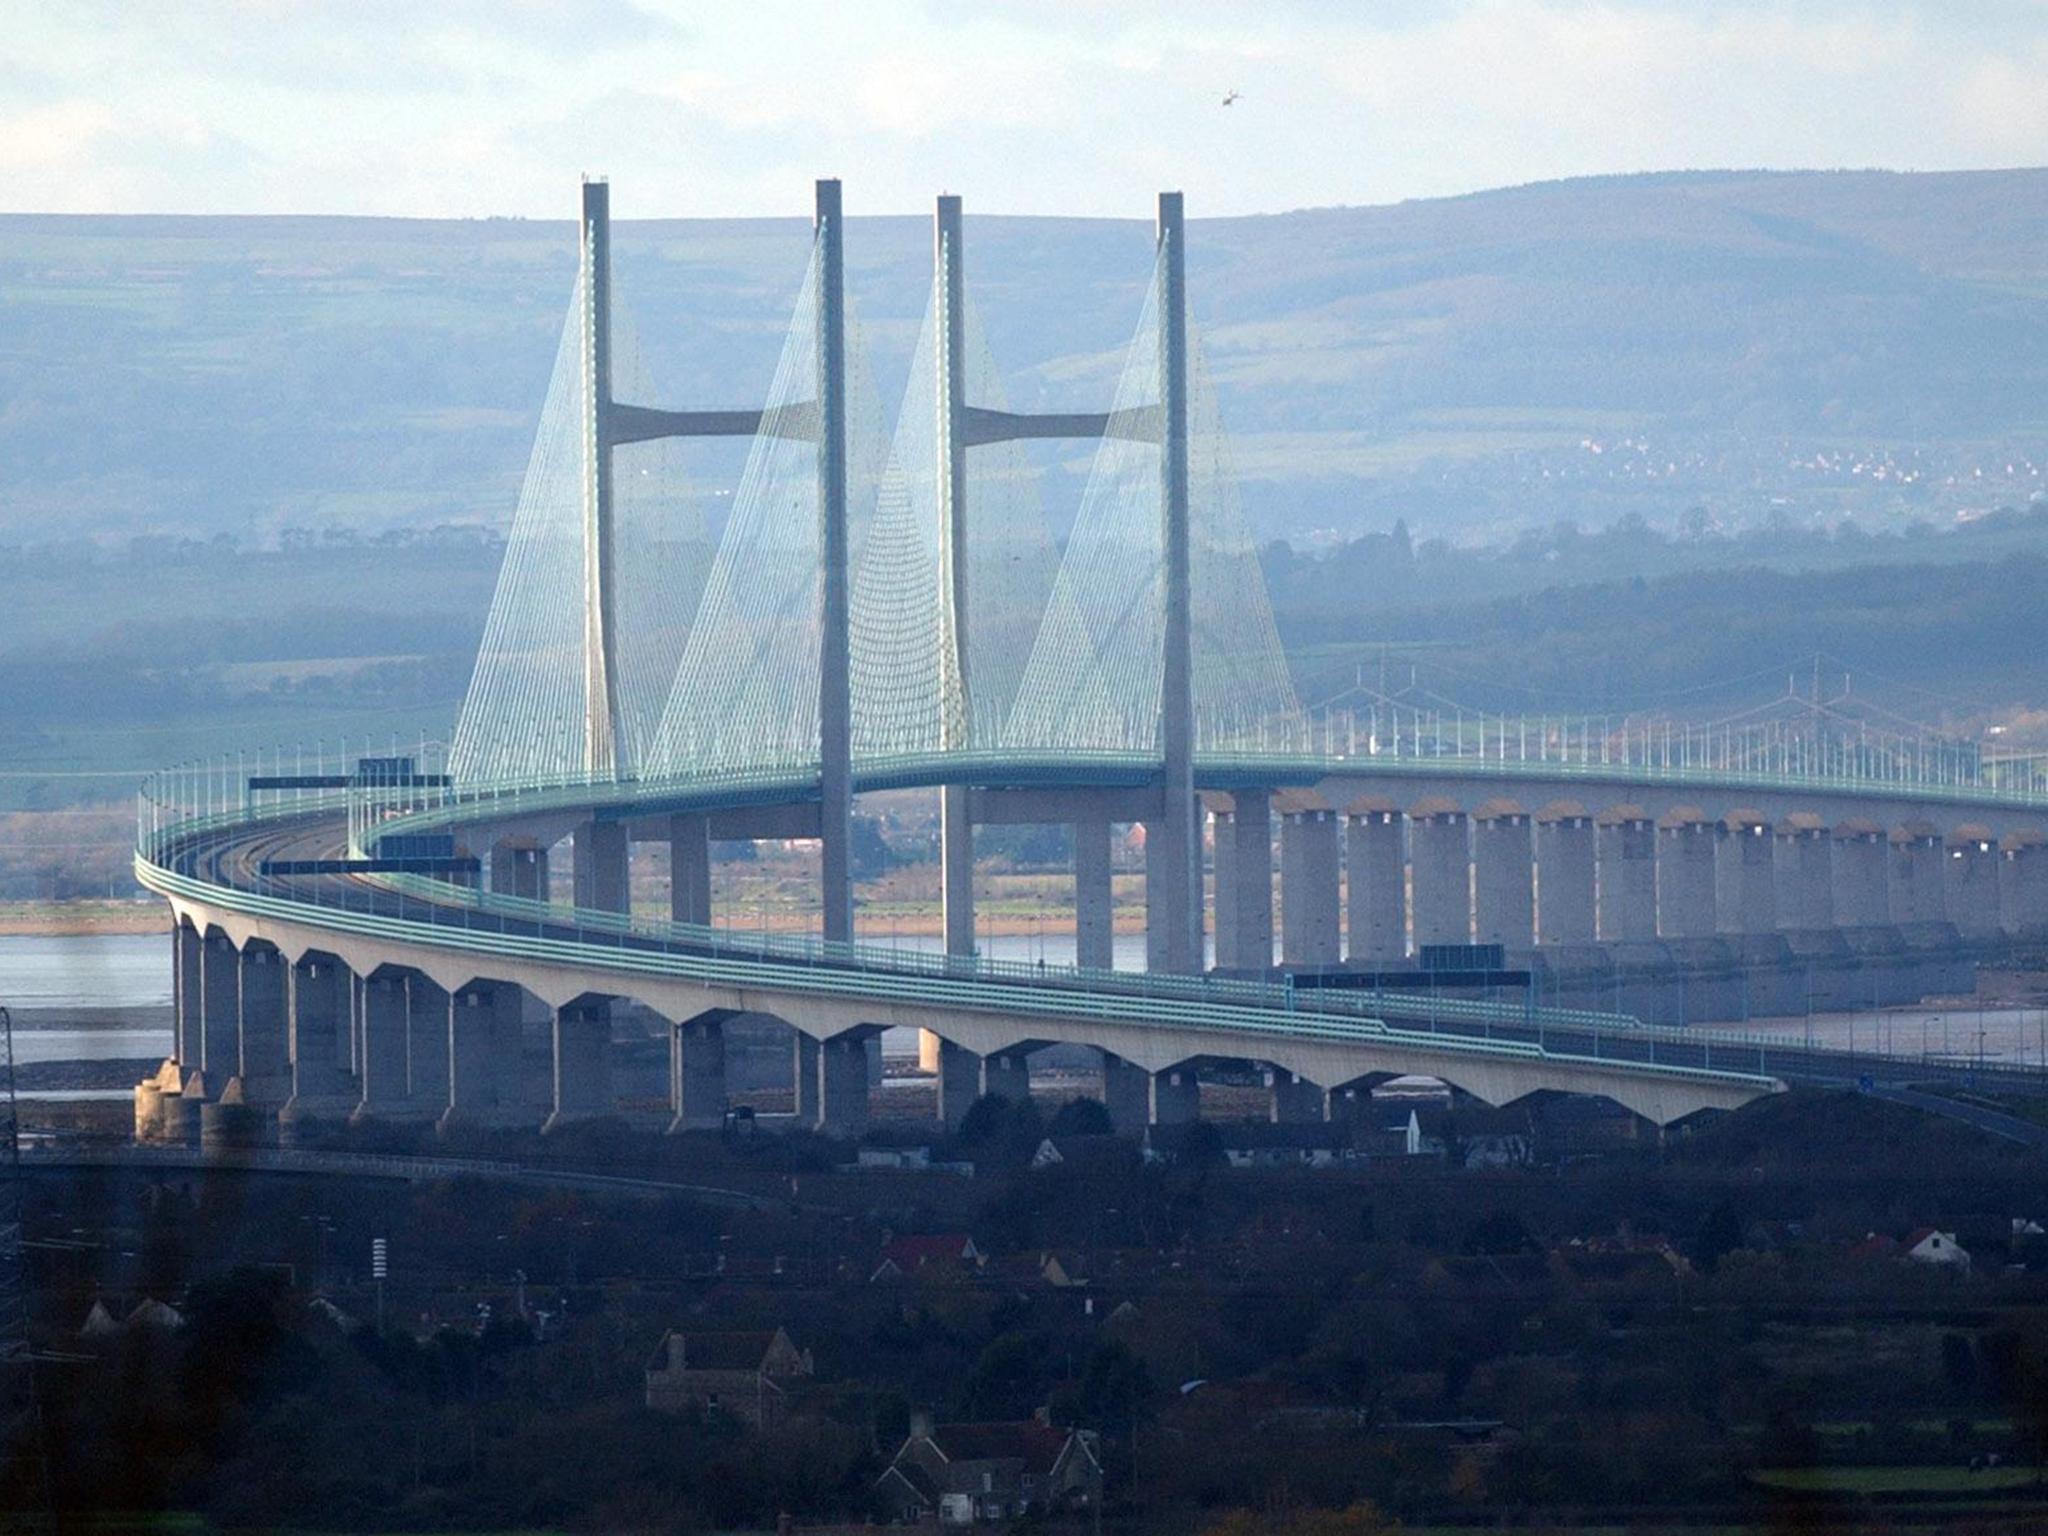 Tolls on the Severn Crossings between England and Wales are to be halved by 2018